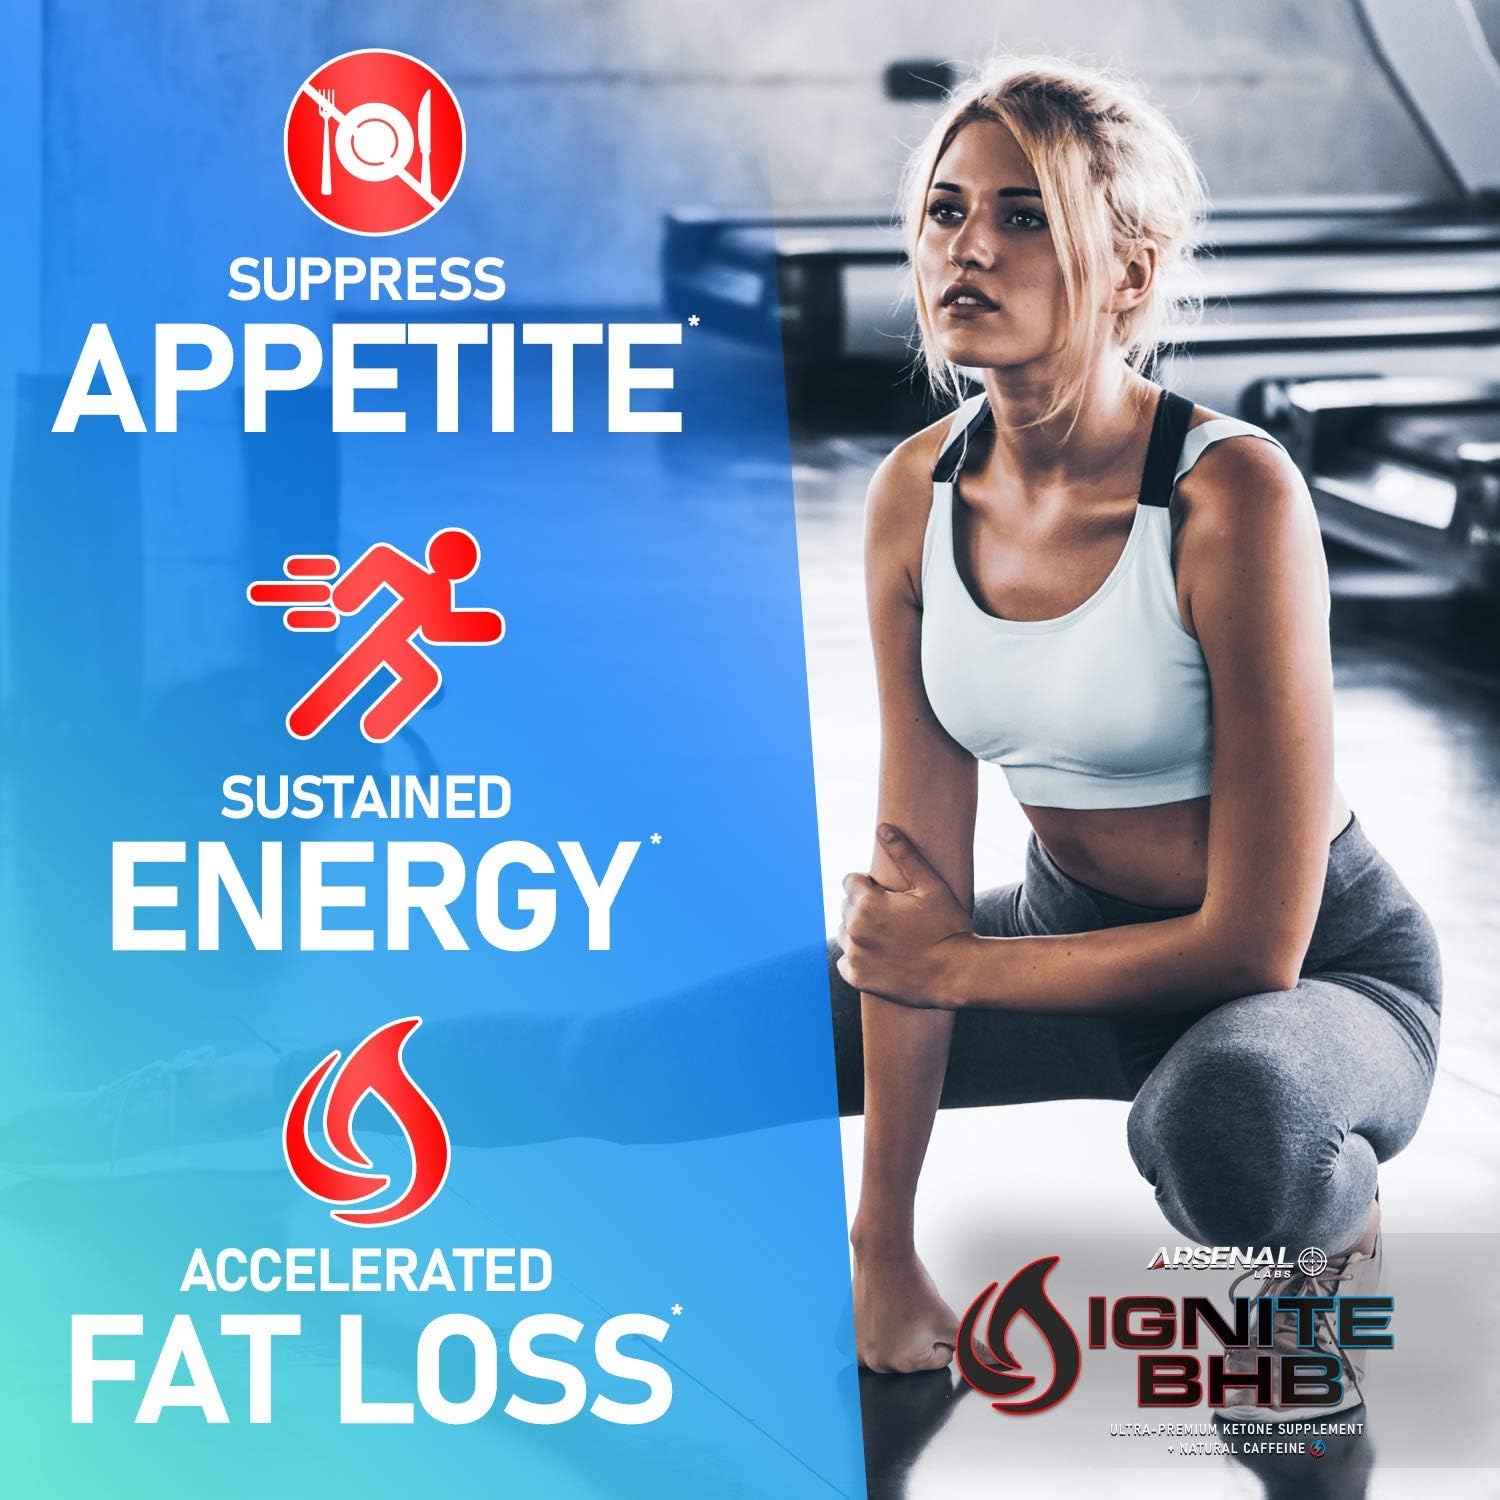 Ignite BHB Ultra-Premium Endurance Formula for Increased Muscle Growth, Recovery, and Energy | Award Winning Taste | Watermelon | 20 Servings